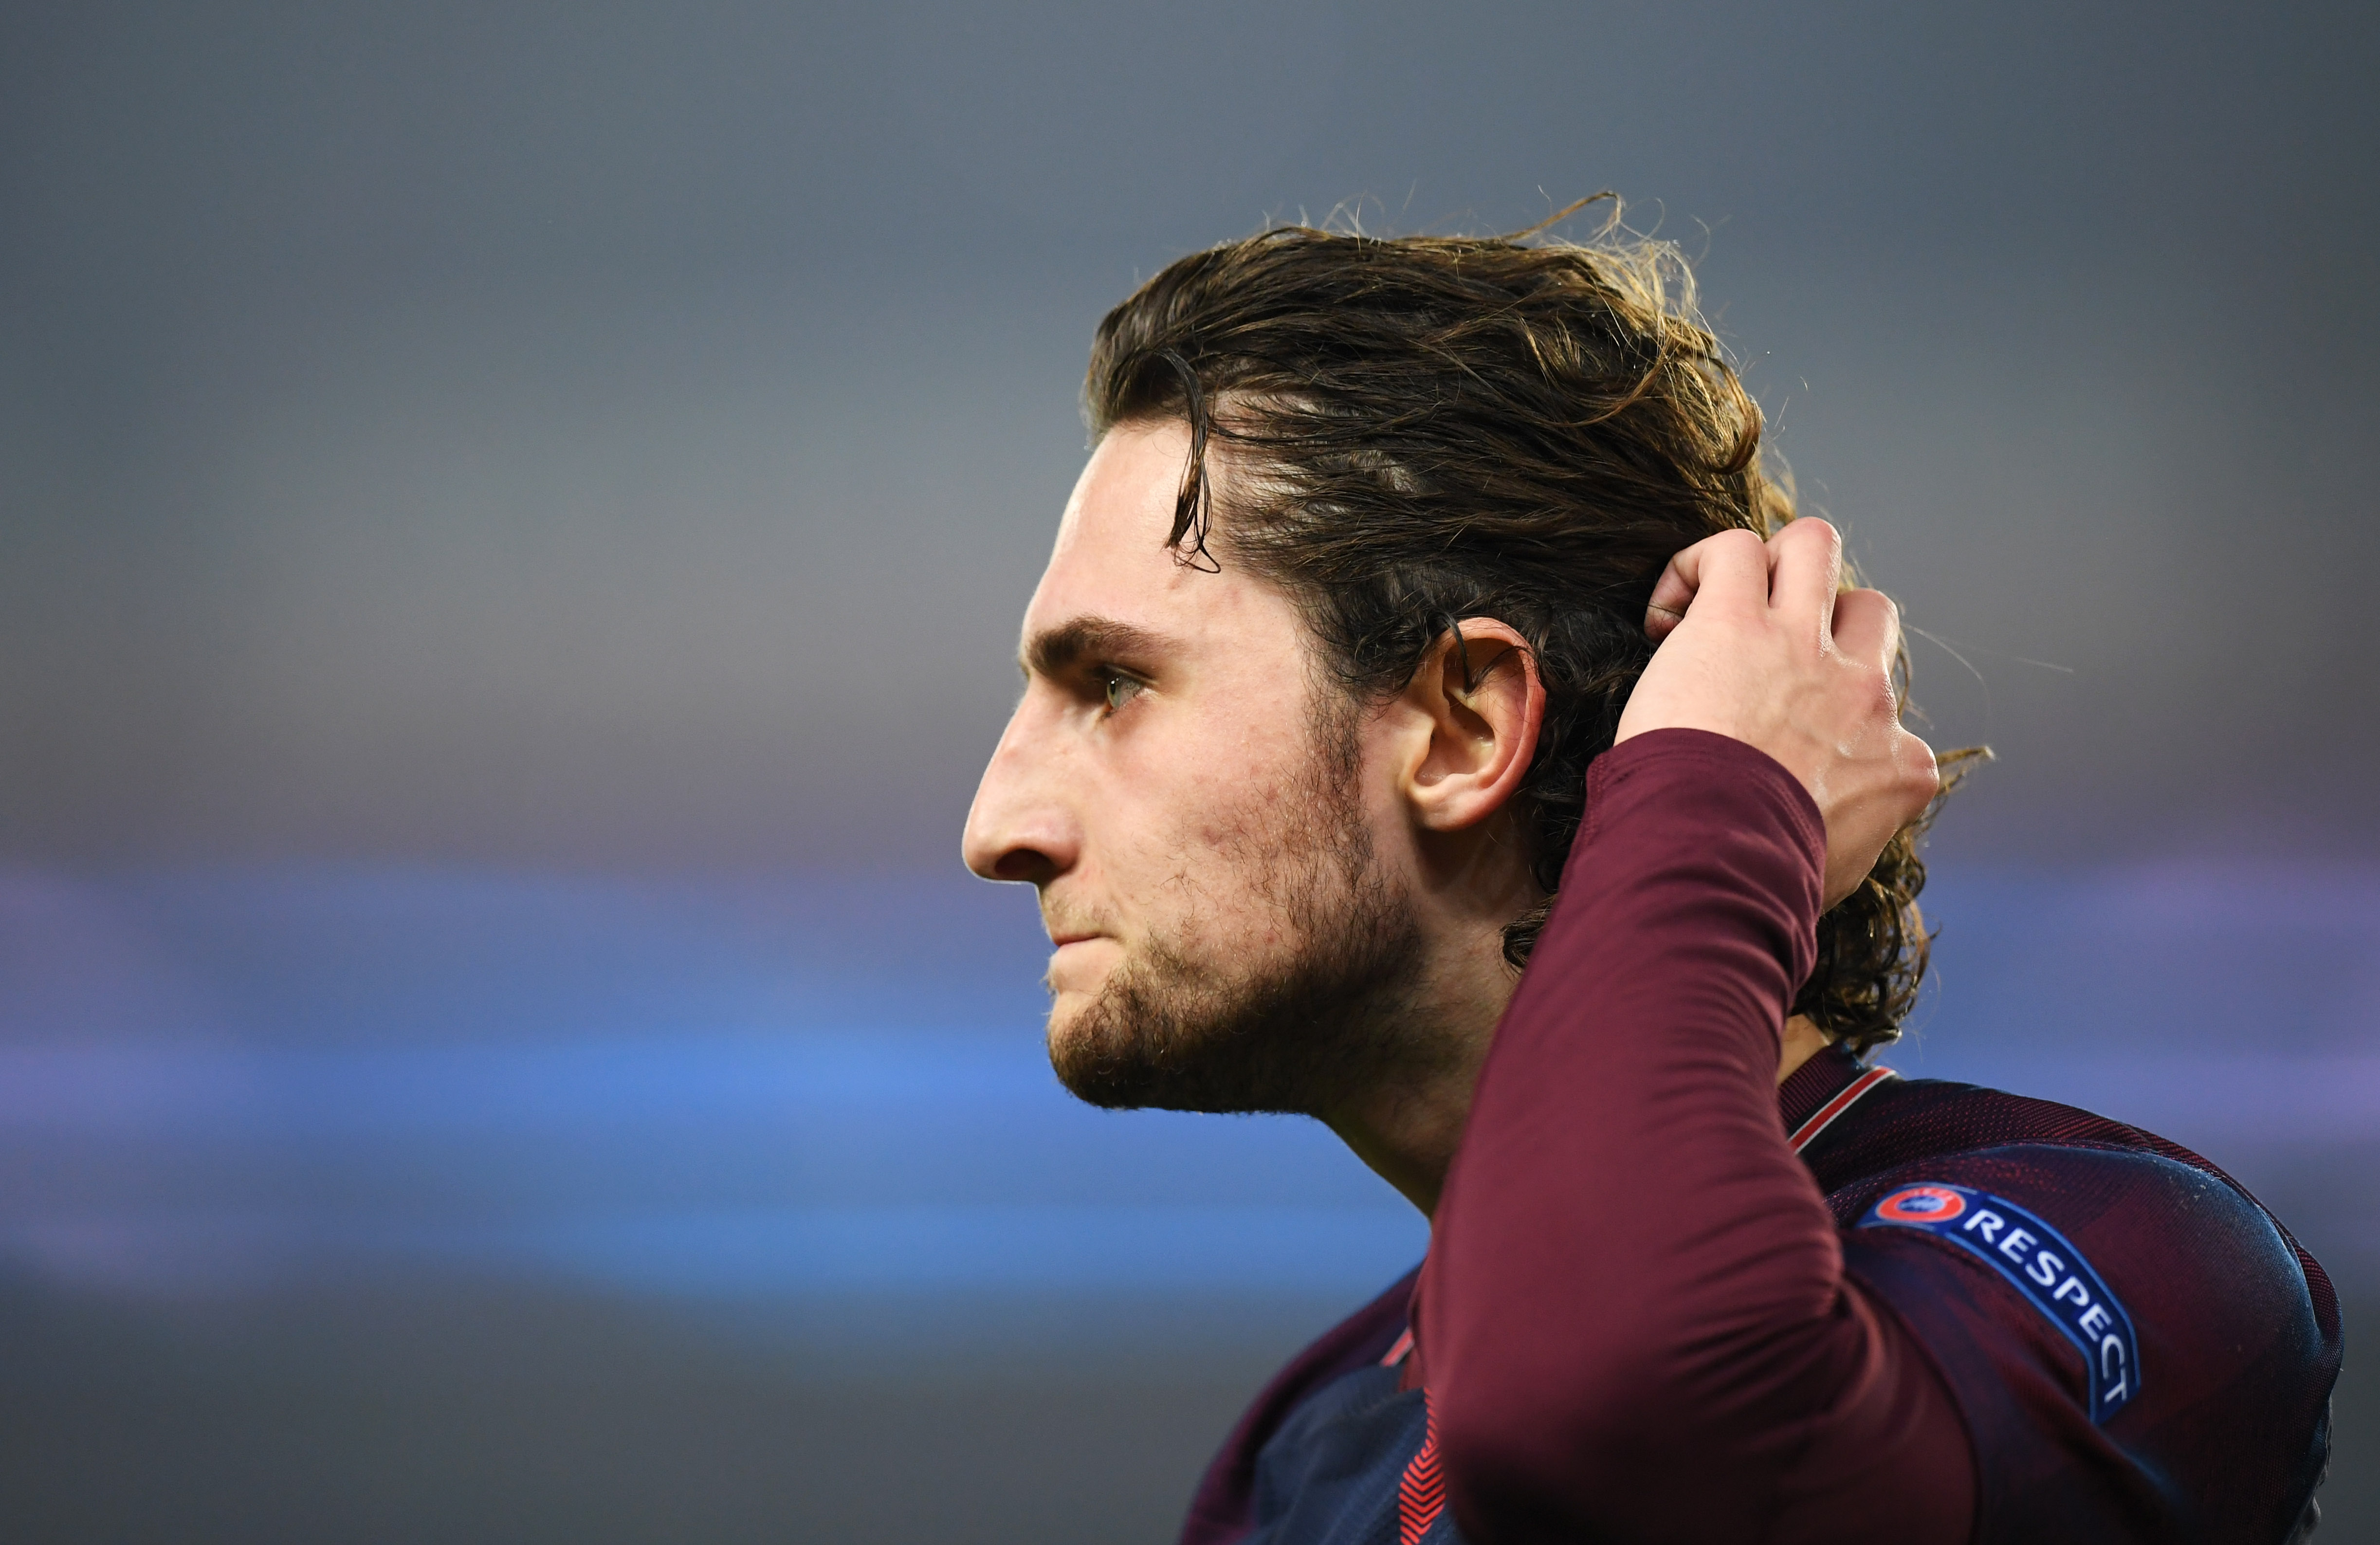 PARIS, FRANCE - MARCH 06:  Adrien Rabiot of PSG  looks dejected in defeat after the UEFA Champions League Round of 16 Second Leg match between Paris Saint-Germain and Real Madrid at Parc des Princes on March 6, 2018 in Paris, France.  (Photo by Matthias Hangst/Getty Images)